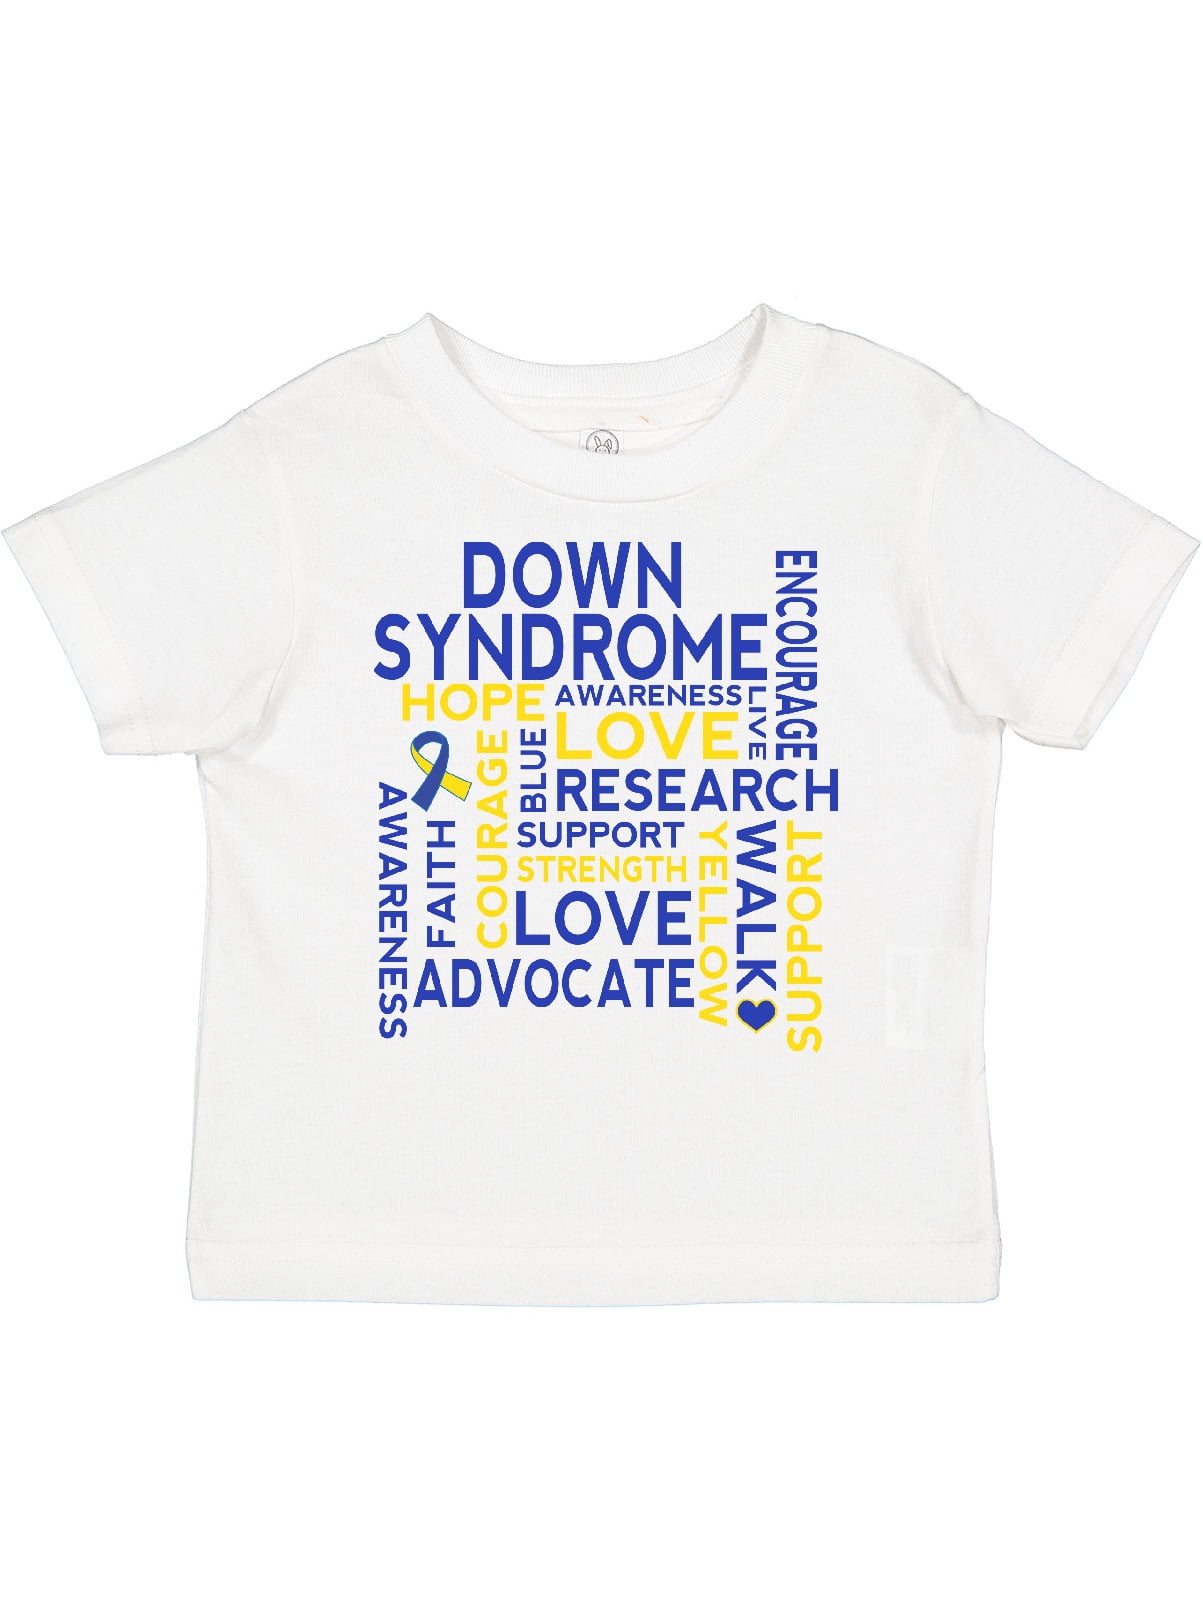 Down Right Perfect Tees Shirt For Mom Mama's World Down Syndrome Day T-shirt 321 Down Syndrome Awareness Shirt Women Down Syndrome Shirt